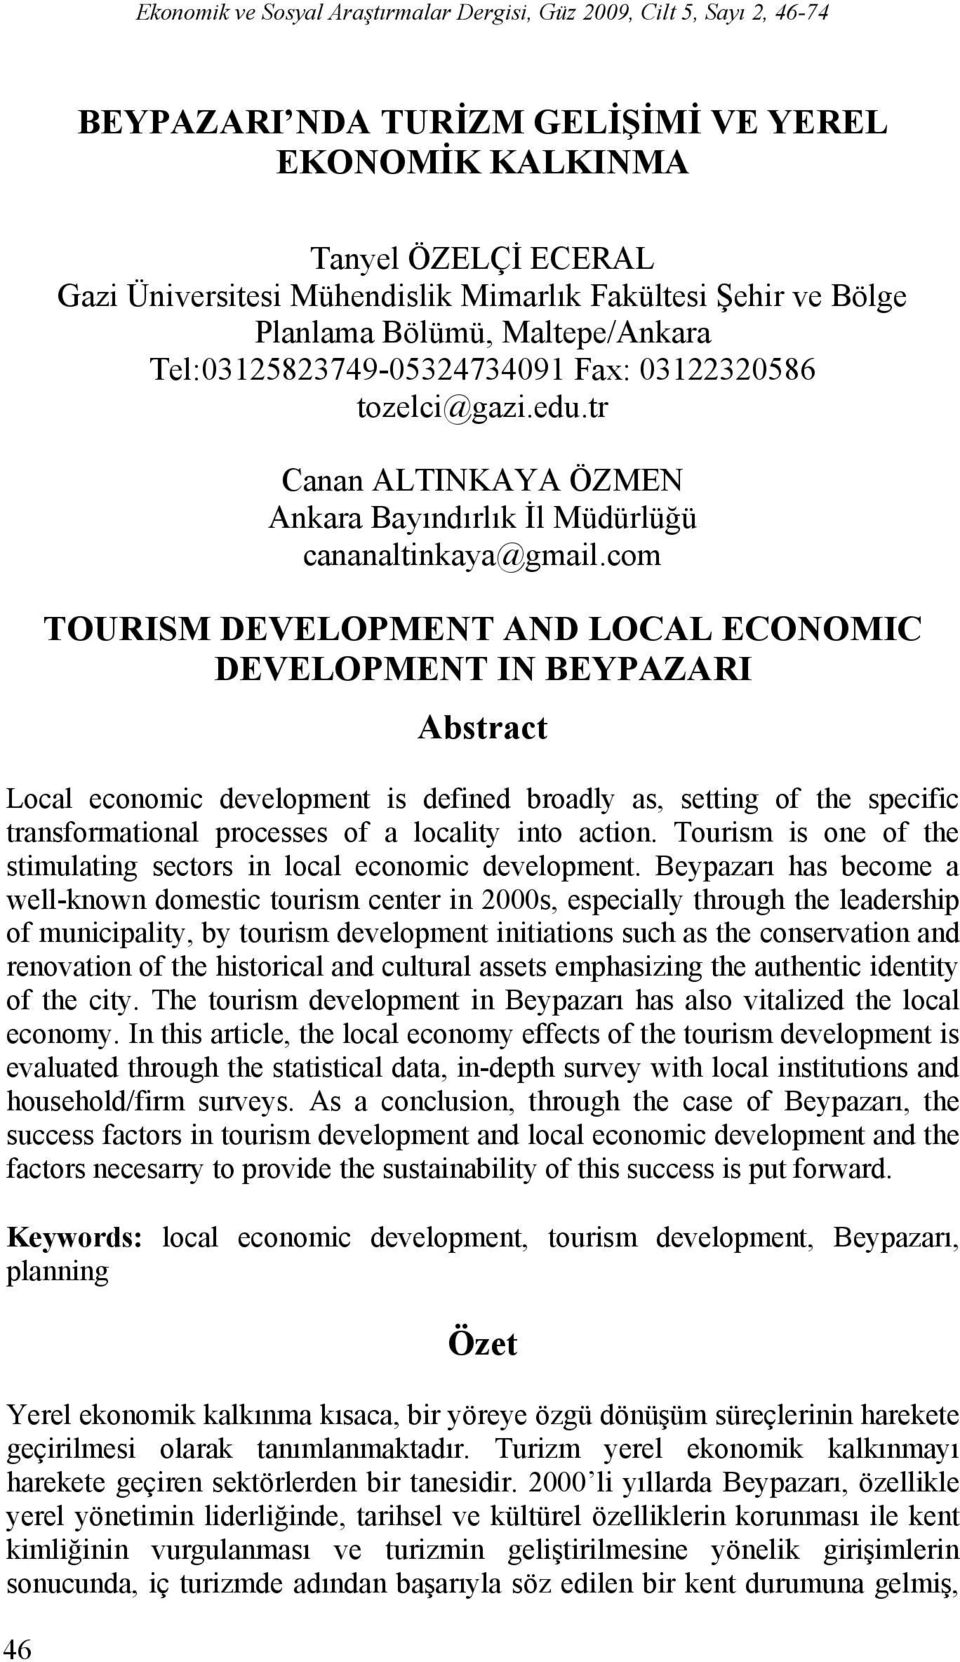 com TOURISM DEVELOPMENT AND LOCAL ECONOMIC DEVELOPMENT IN BEYPAZARI Abstract Local economic development is defined broadly as, setting of the specific transformational processes of a locality into